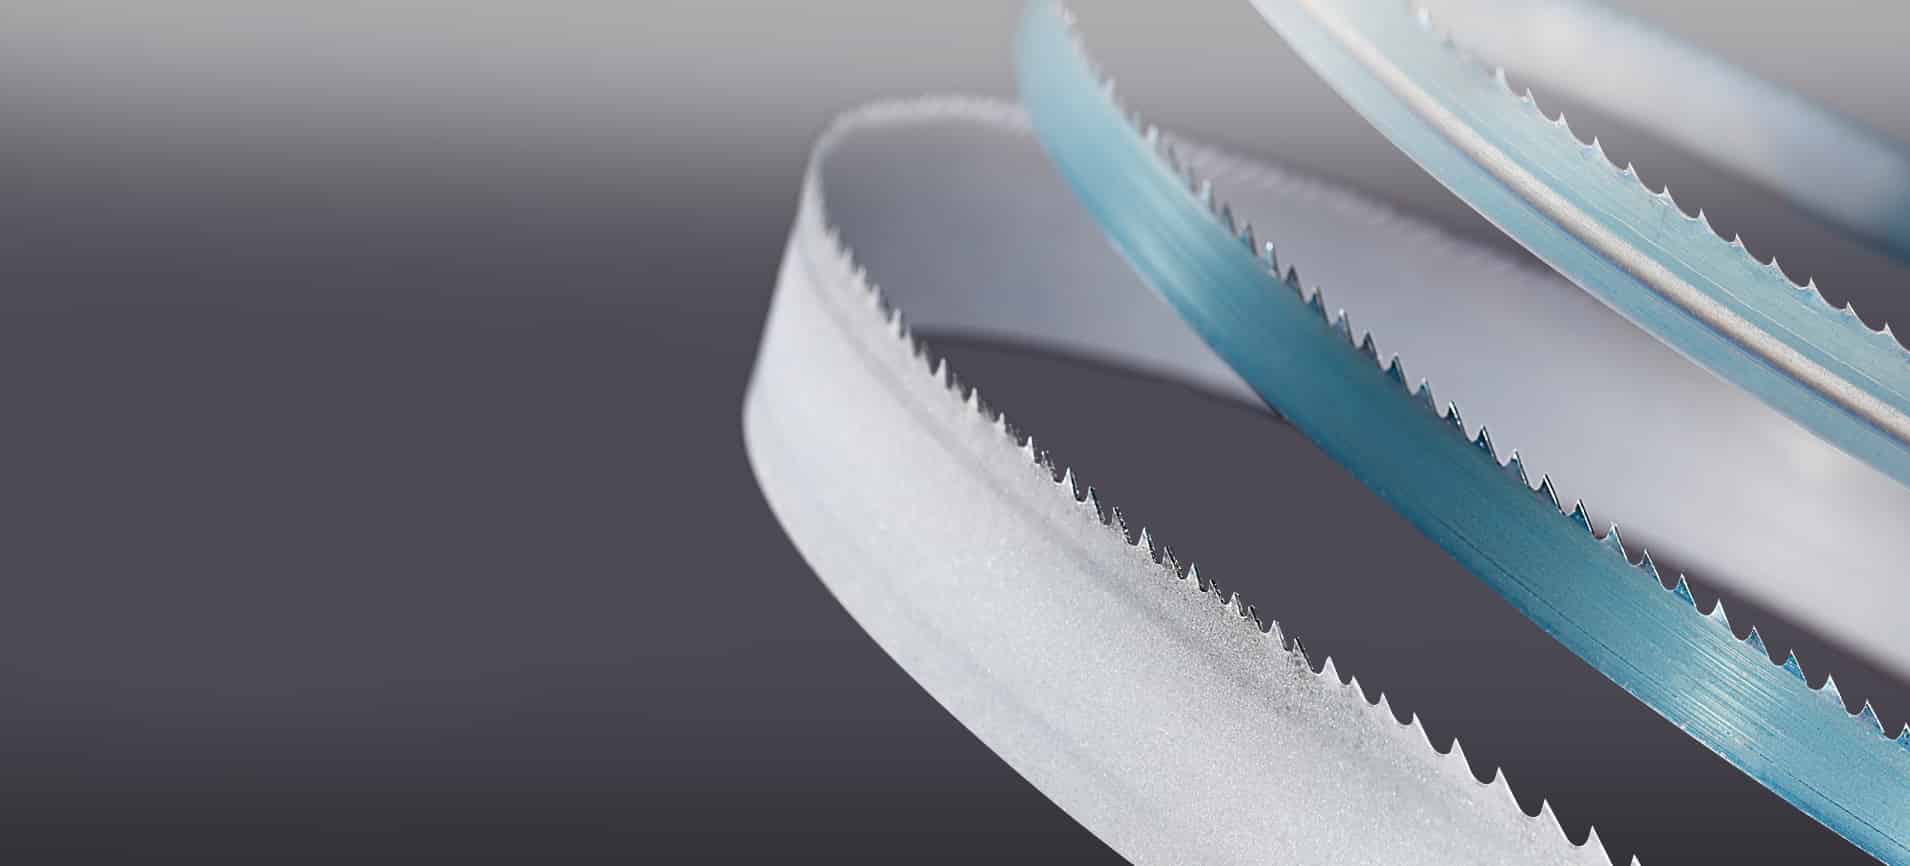 Simmons' metal cutting bandsaw blades curve and catch the light against a dark gray background.